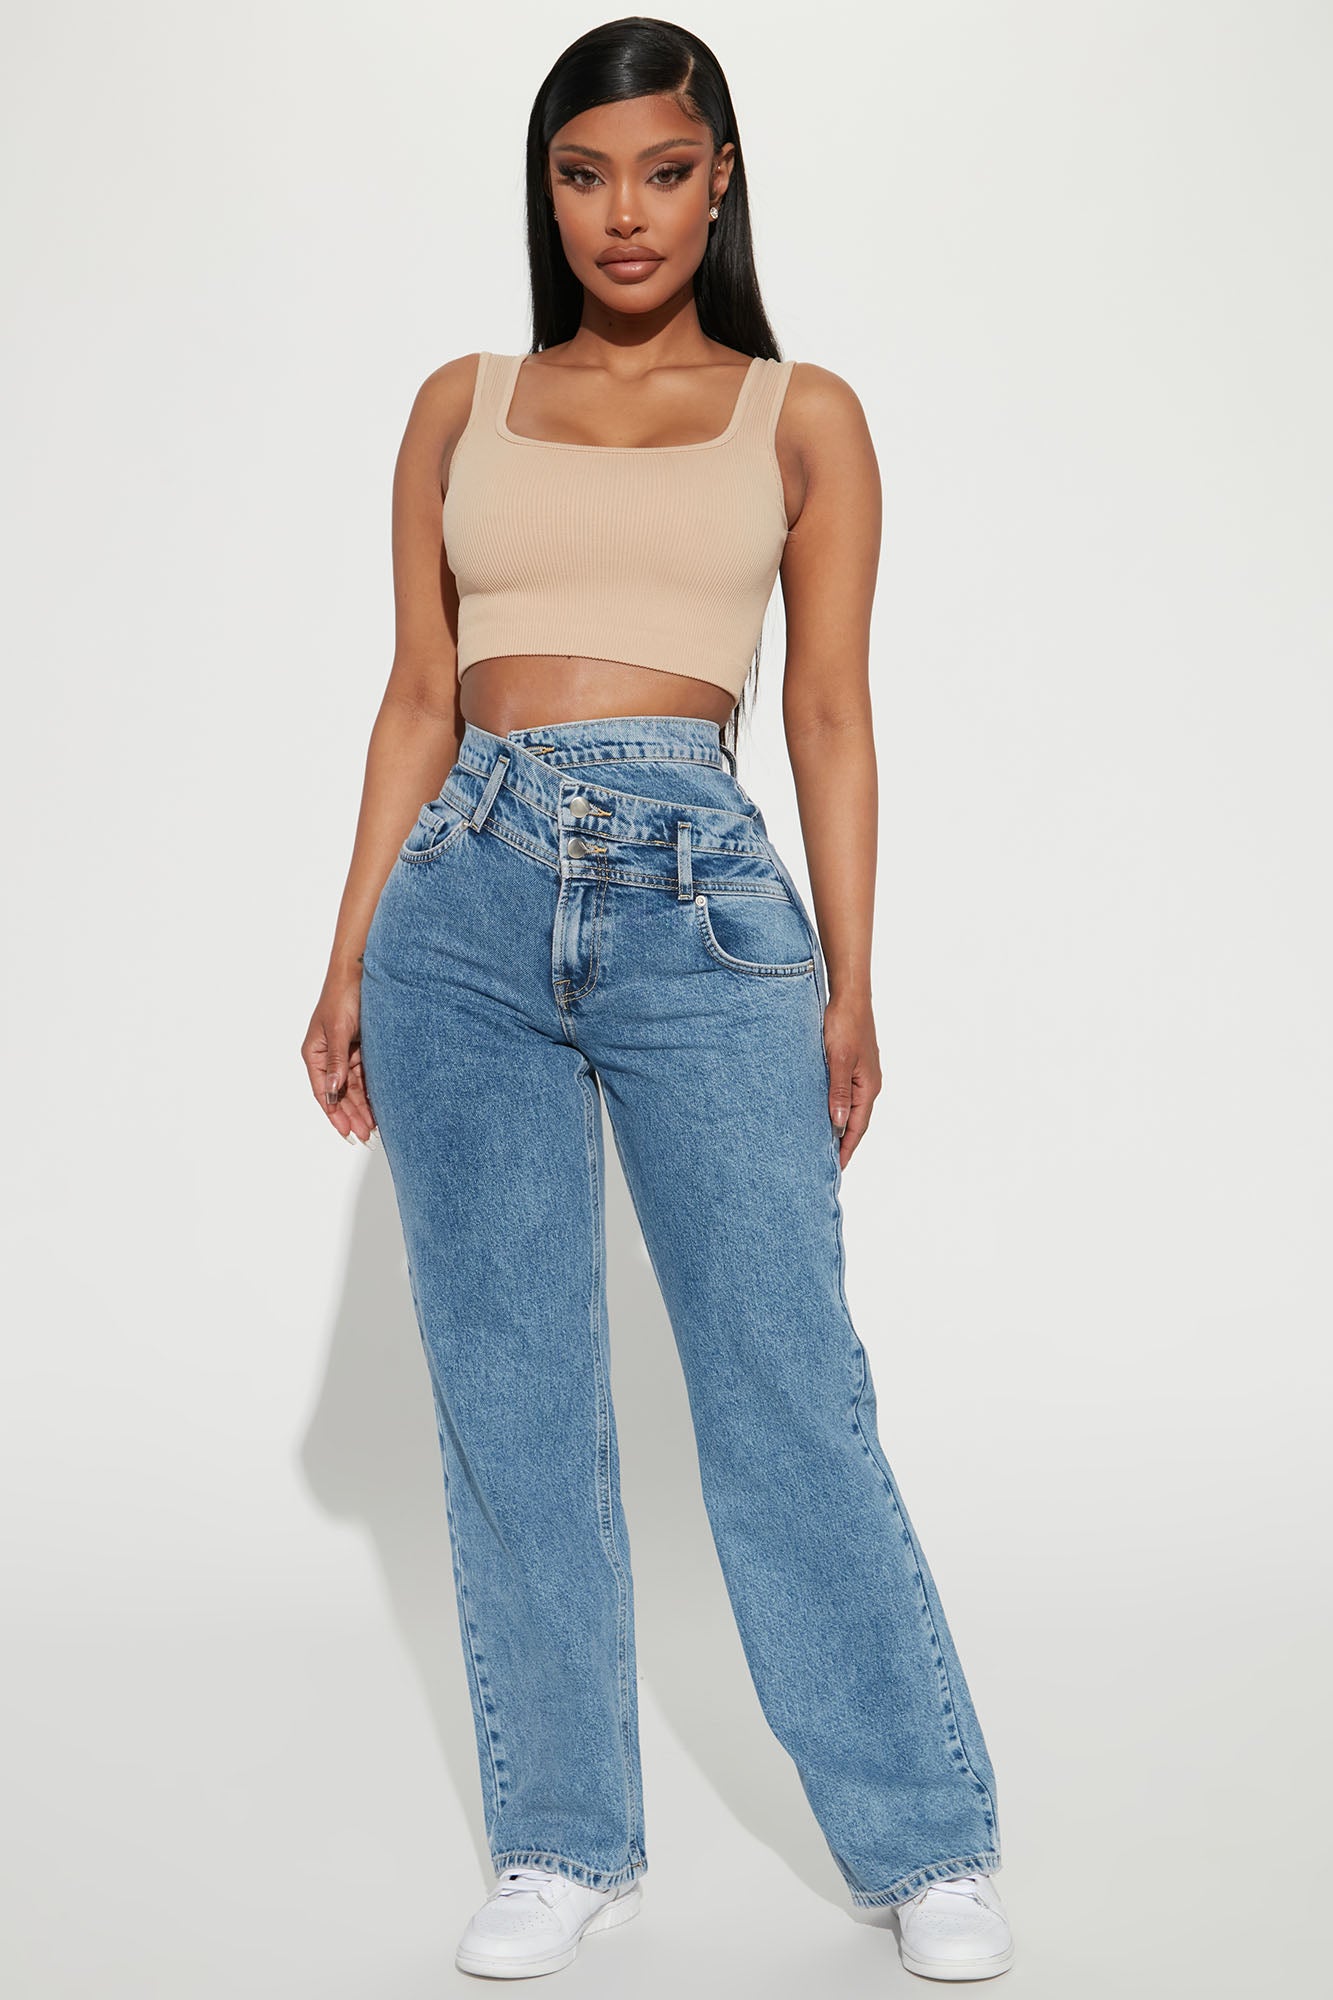 To The Extreme Crossover Straight Leg Jean - Medium Wash